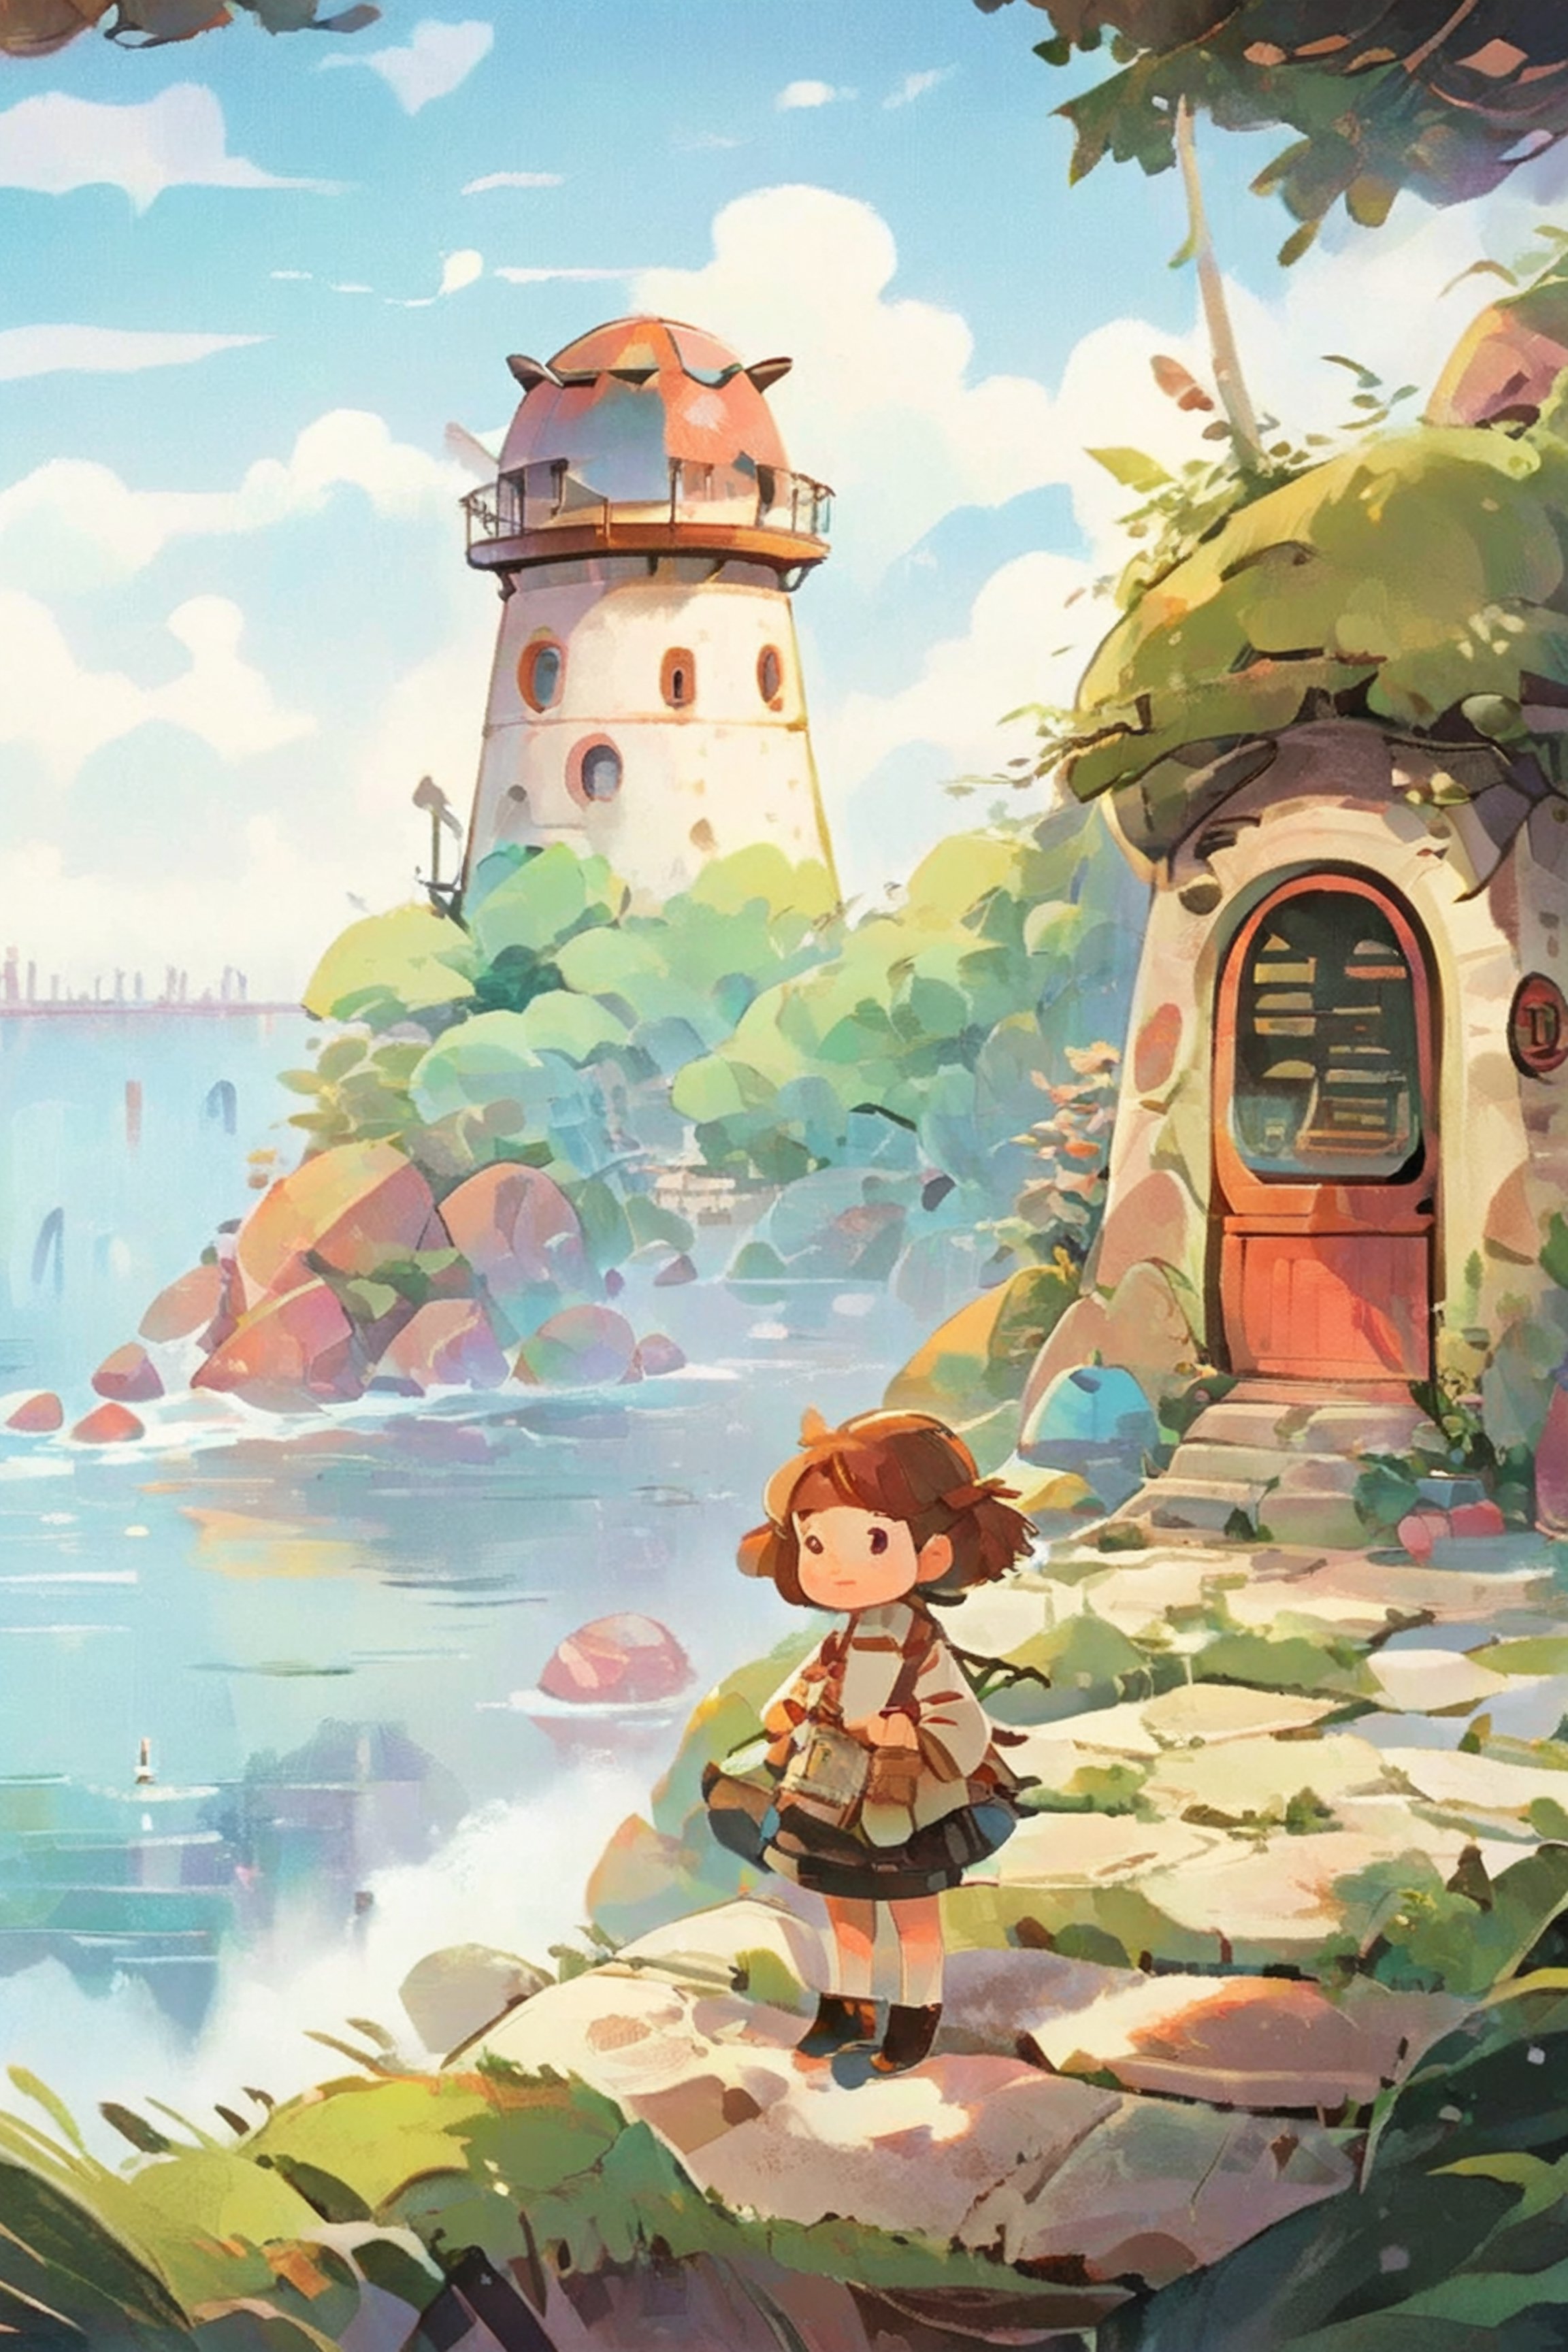 a beautiful artwork illustration, detailed scenery, environment design illustration, highly detailed scene, beautiful anime scenery concept art, immensely detailed scene, vintage paper, more detail XL, Warm pastel colors, shuicaixiaodian, girl, brown braid hair, cute, kawaii, beautiful face, in front of a large strange building. The image depicts a futuristic, large spherical structure atop cylindrical supports, reminiscent of a water tower but with architectural features, situated on a body of water flanked by rocky outcrops with vegetation. The art style is digital with a clean, vivid color palette, using cel-shading techniques to create a flat, yet textured appearance. The technique is similar to that used in anime backgrounds, evoking the works of artists from Studio Ghibli, such as Hayao Miyazaki, or Makoto Shinkai, known for their detailed, immersive environments. It's a blend of natural landscape and science fiction architecture, presenting an idealized, serene scene with a clear sky.